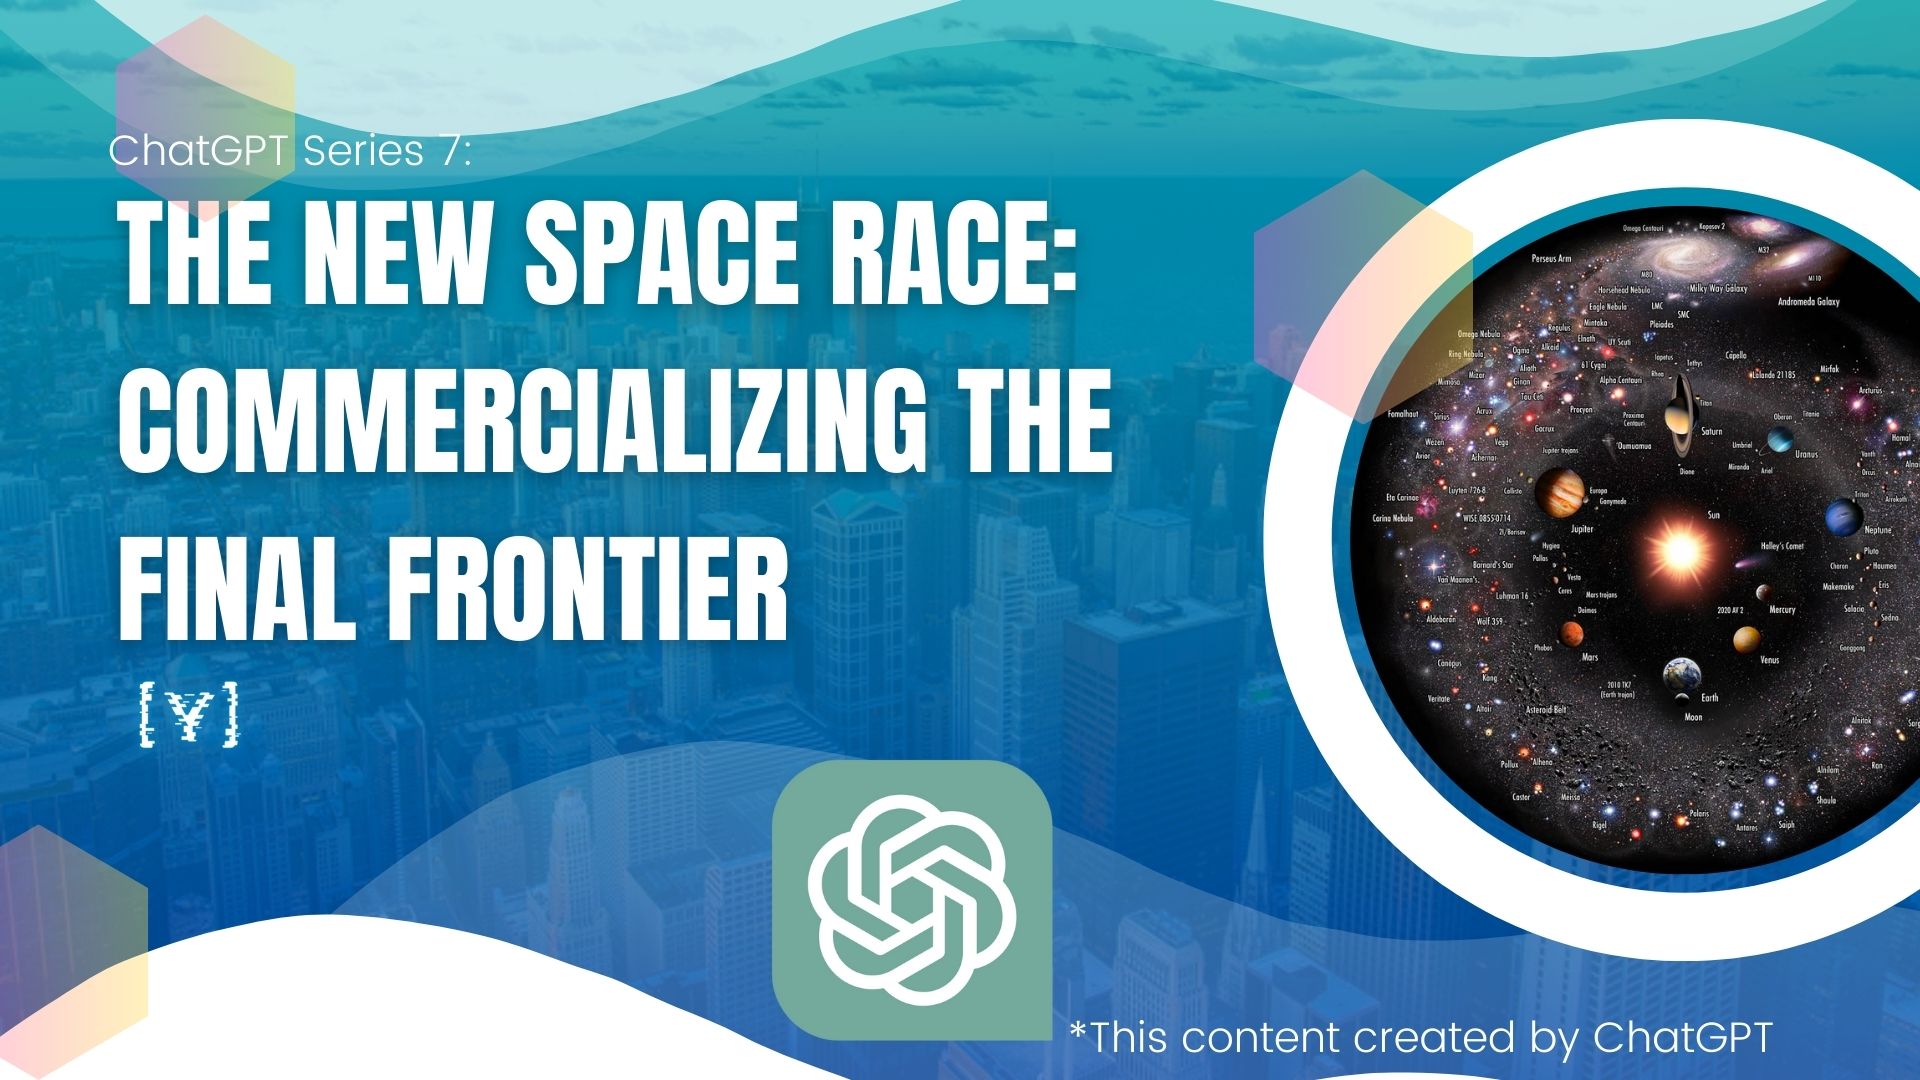 The New Space Race: Commercializing the Final Frontier